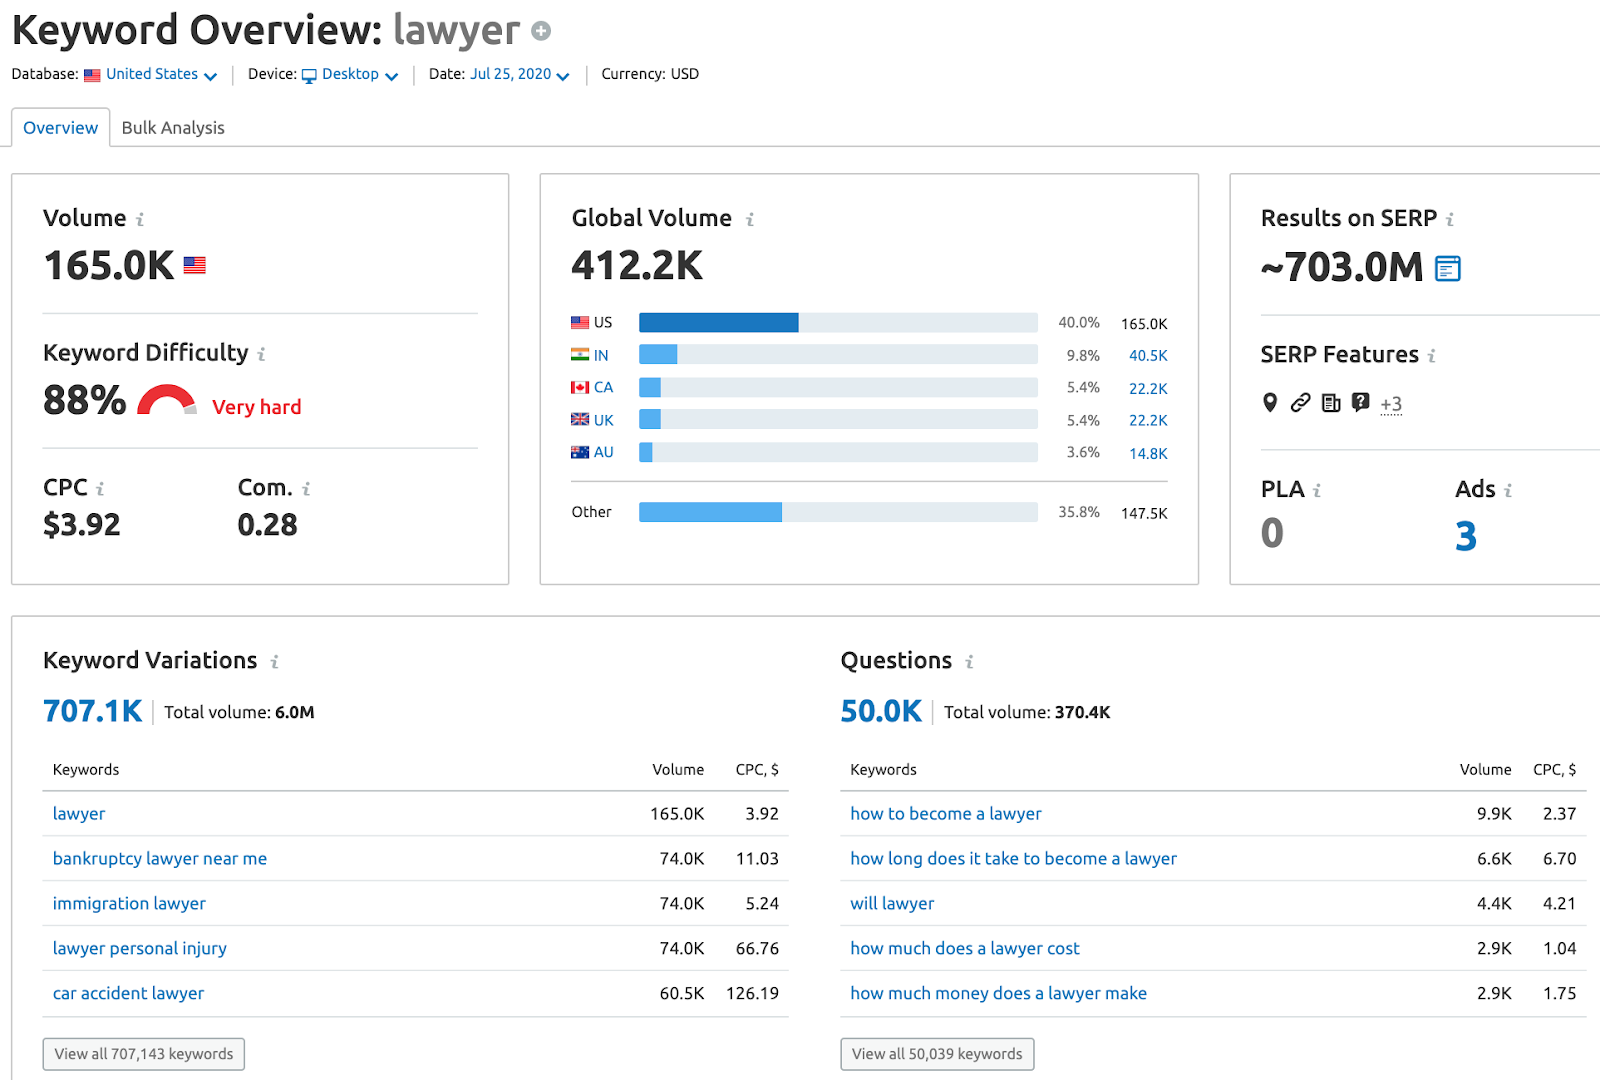 Lawyer Keyword Overview